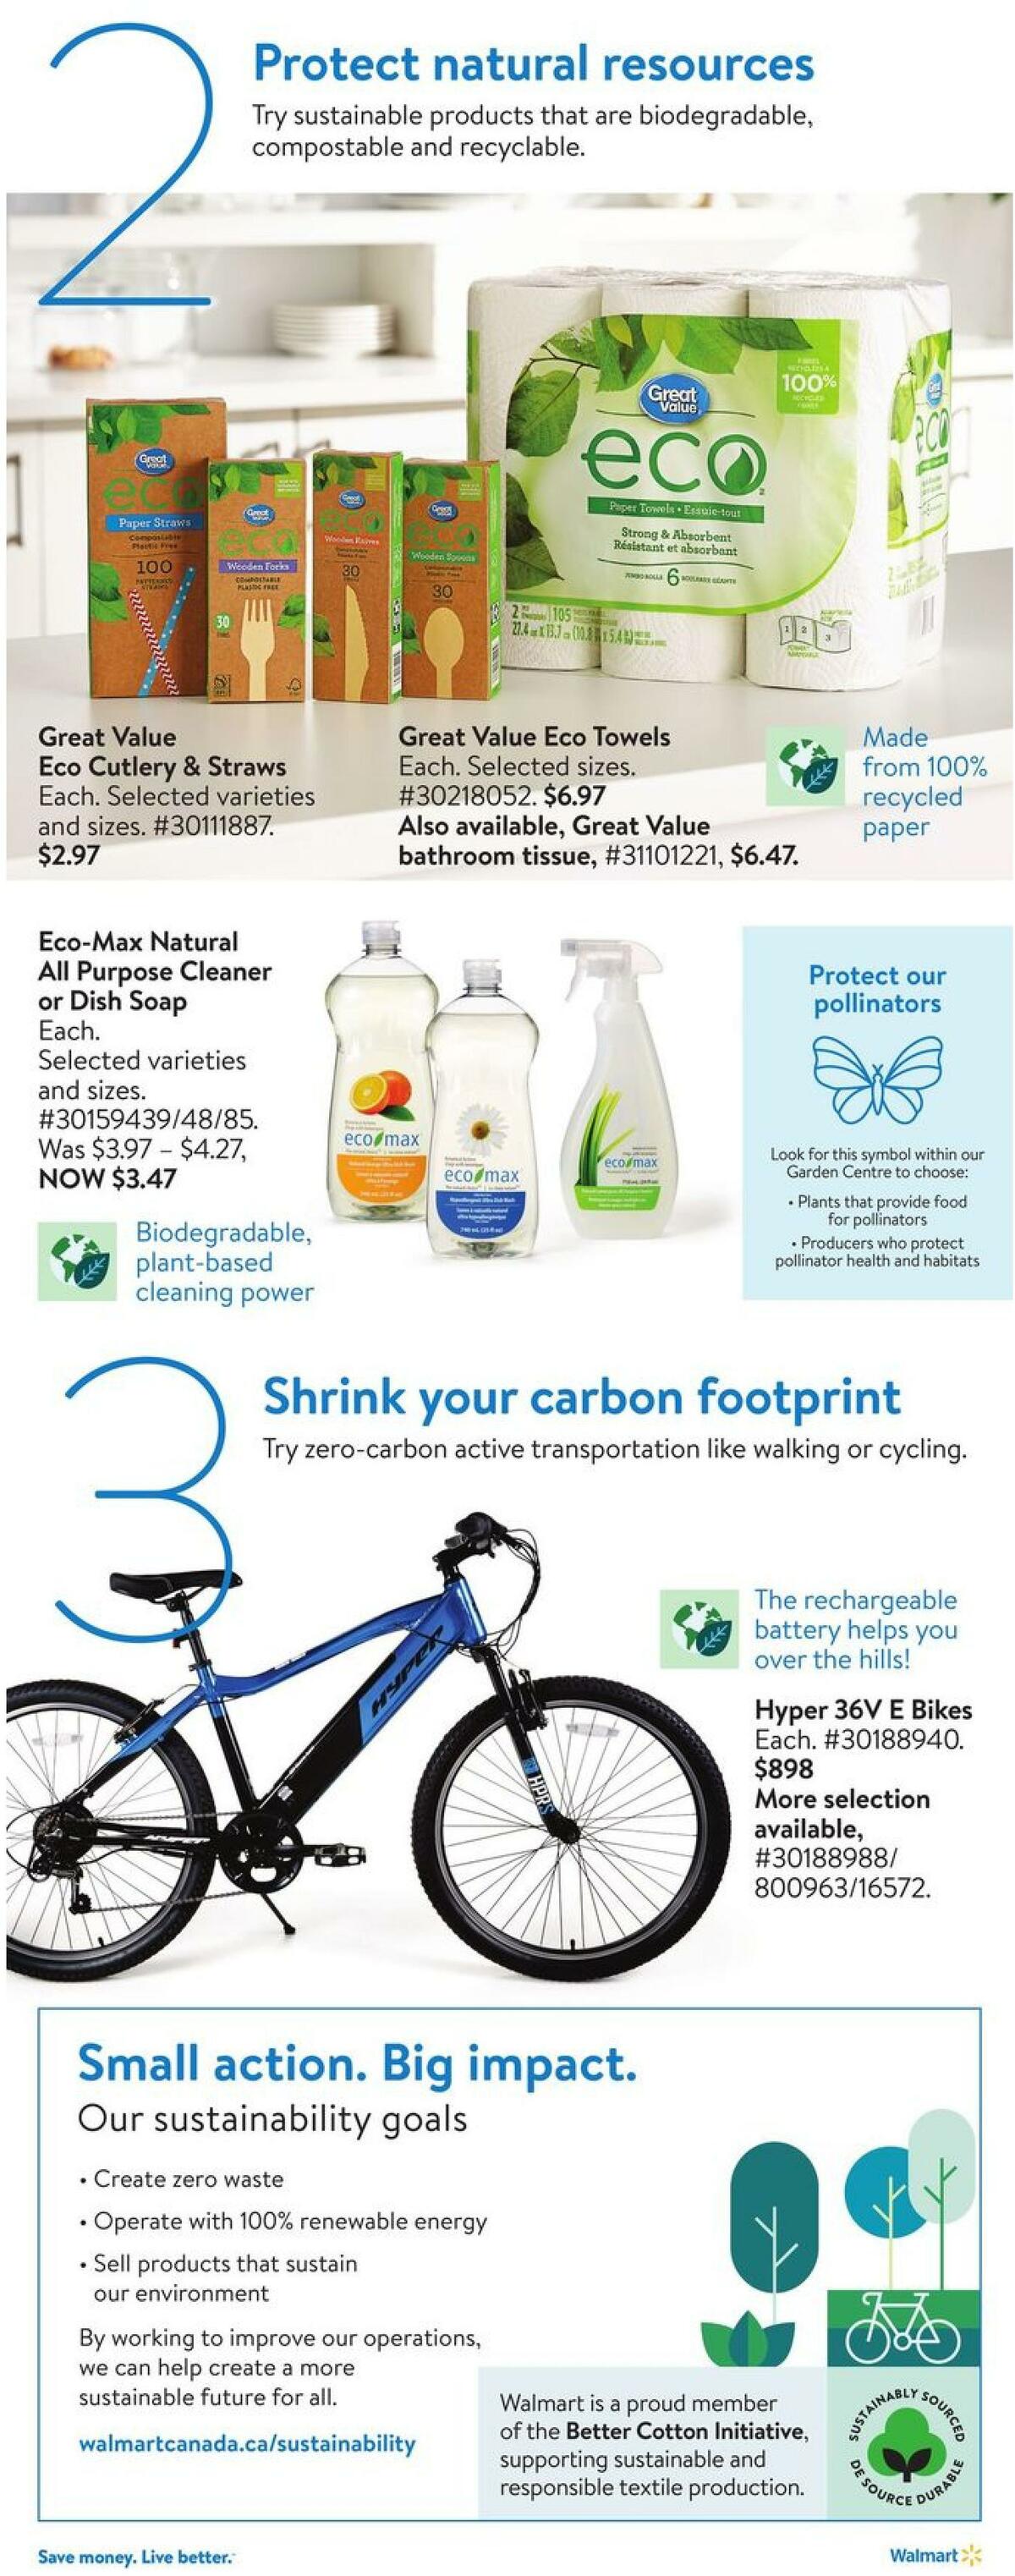 Walmart Flyer from April 7